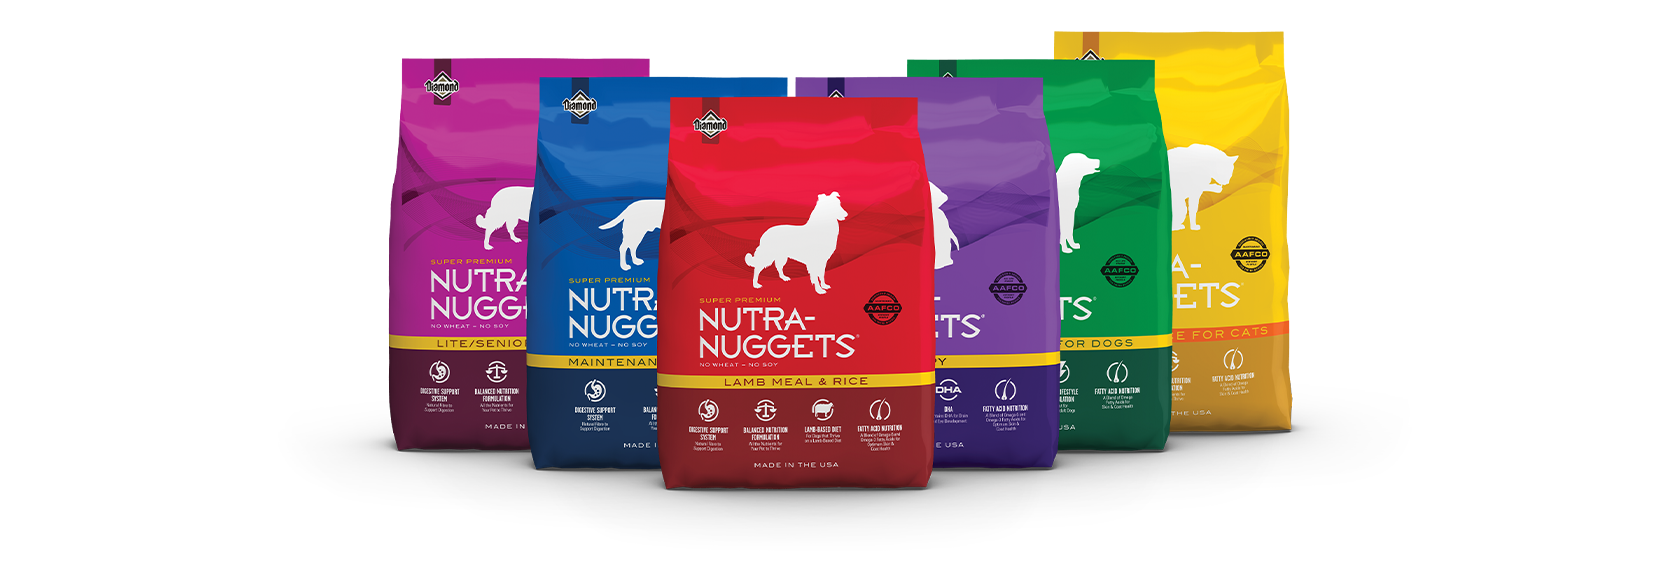 Nutra Nuggets Global Product Family | Nutra-Nuggets